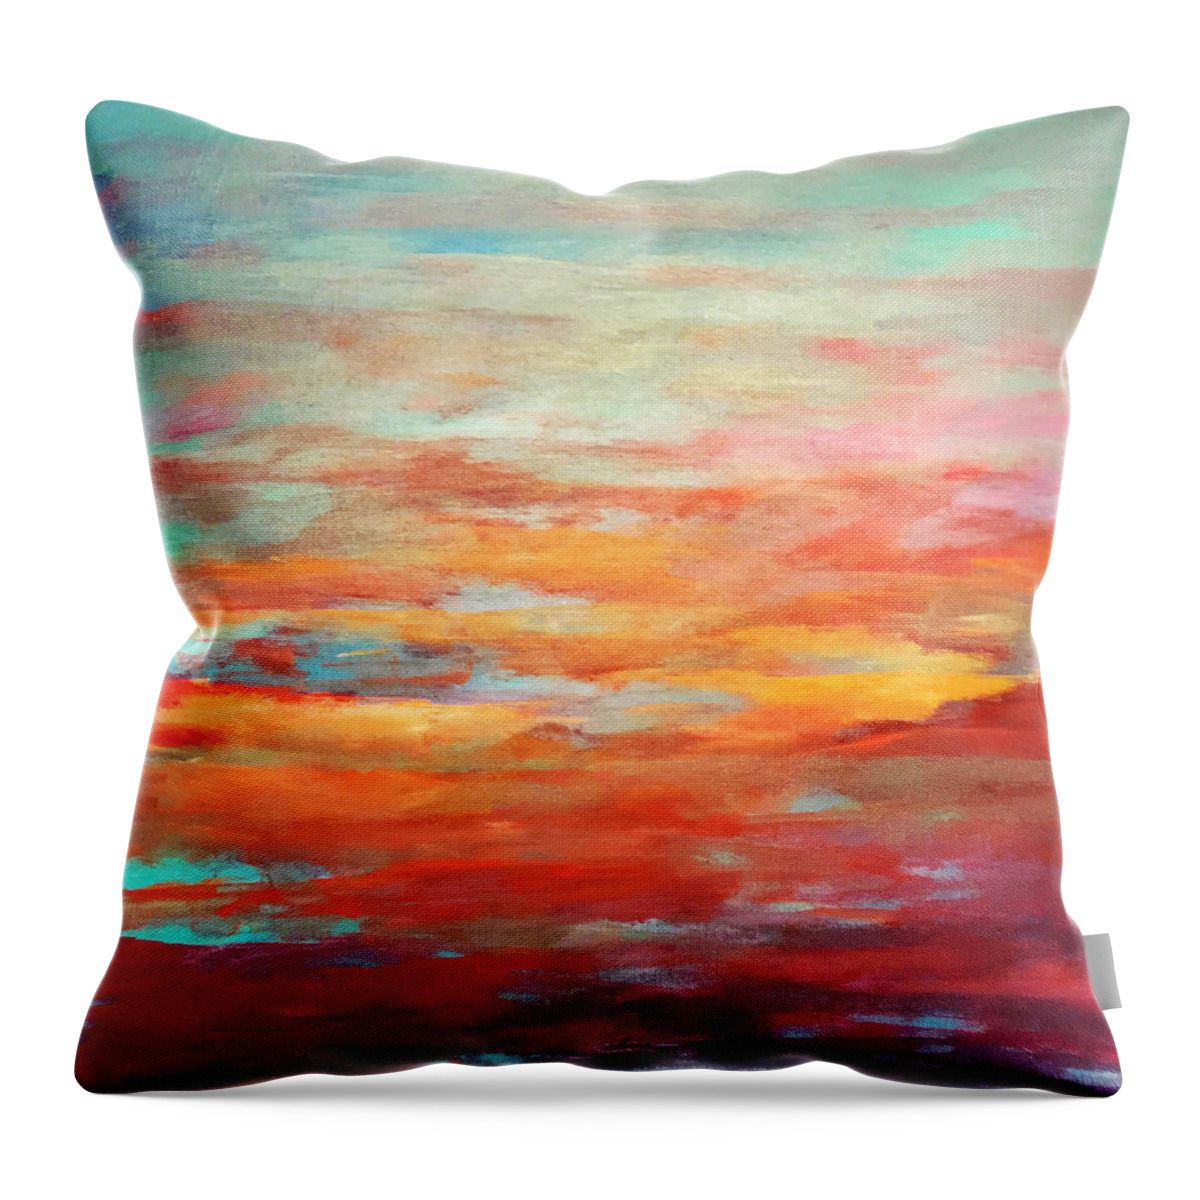 Sunrise Throw Pillow featuring the digital art Dawn's Early light by Linda Bailey